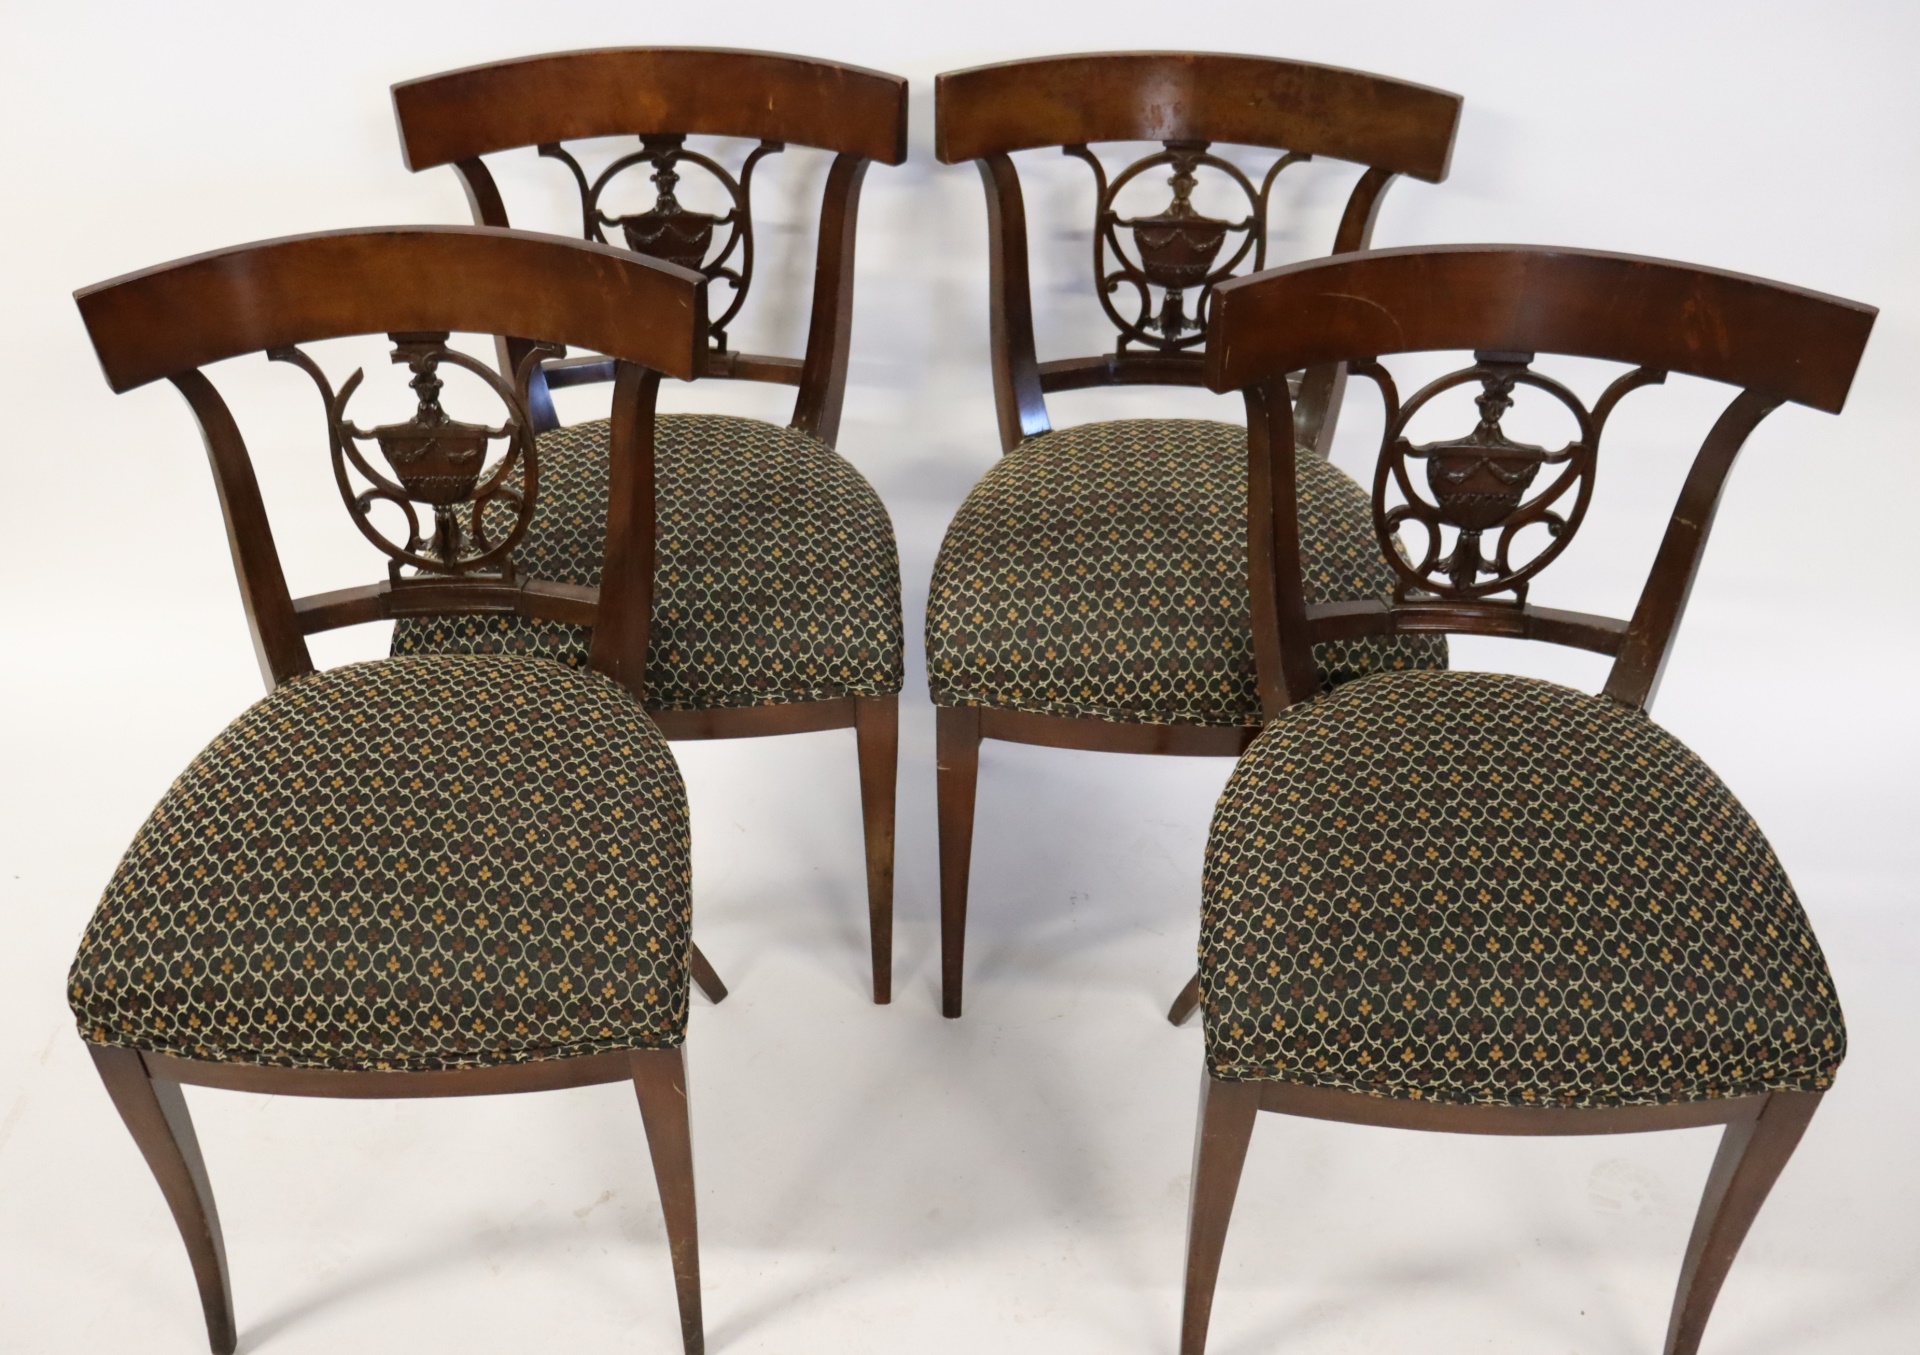 4 NEOCLASSICAL STYLE CHAIRS From